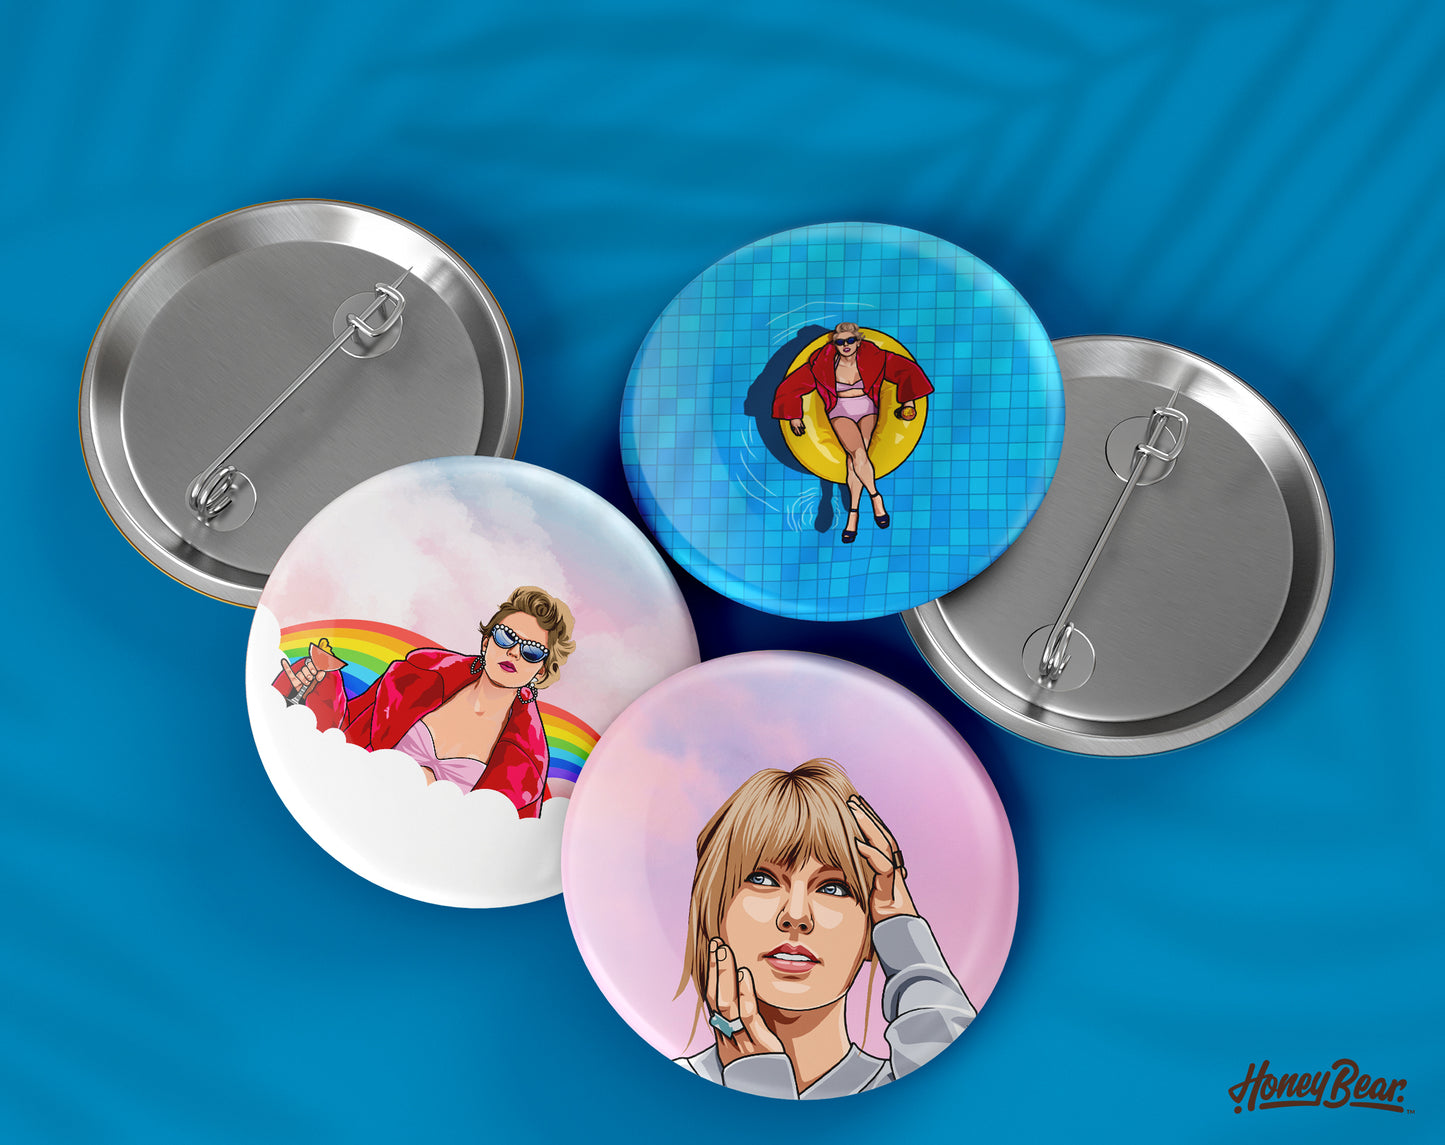 Swiftie Love: Pinback Buttons Inspired by the 'Lover' Album